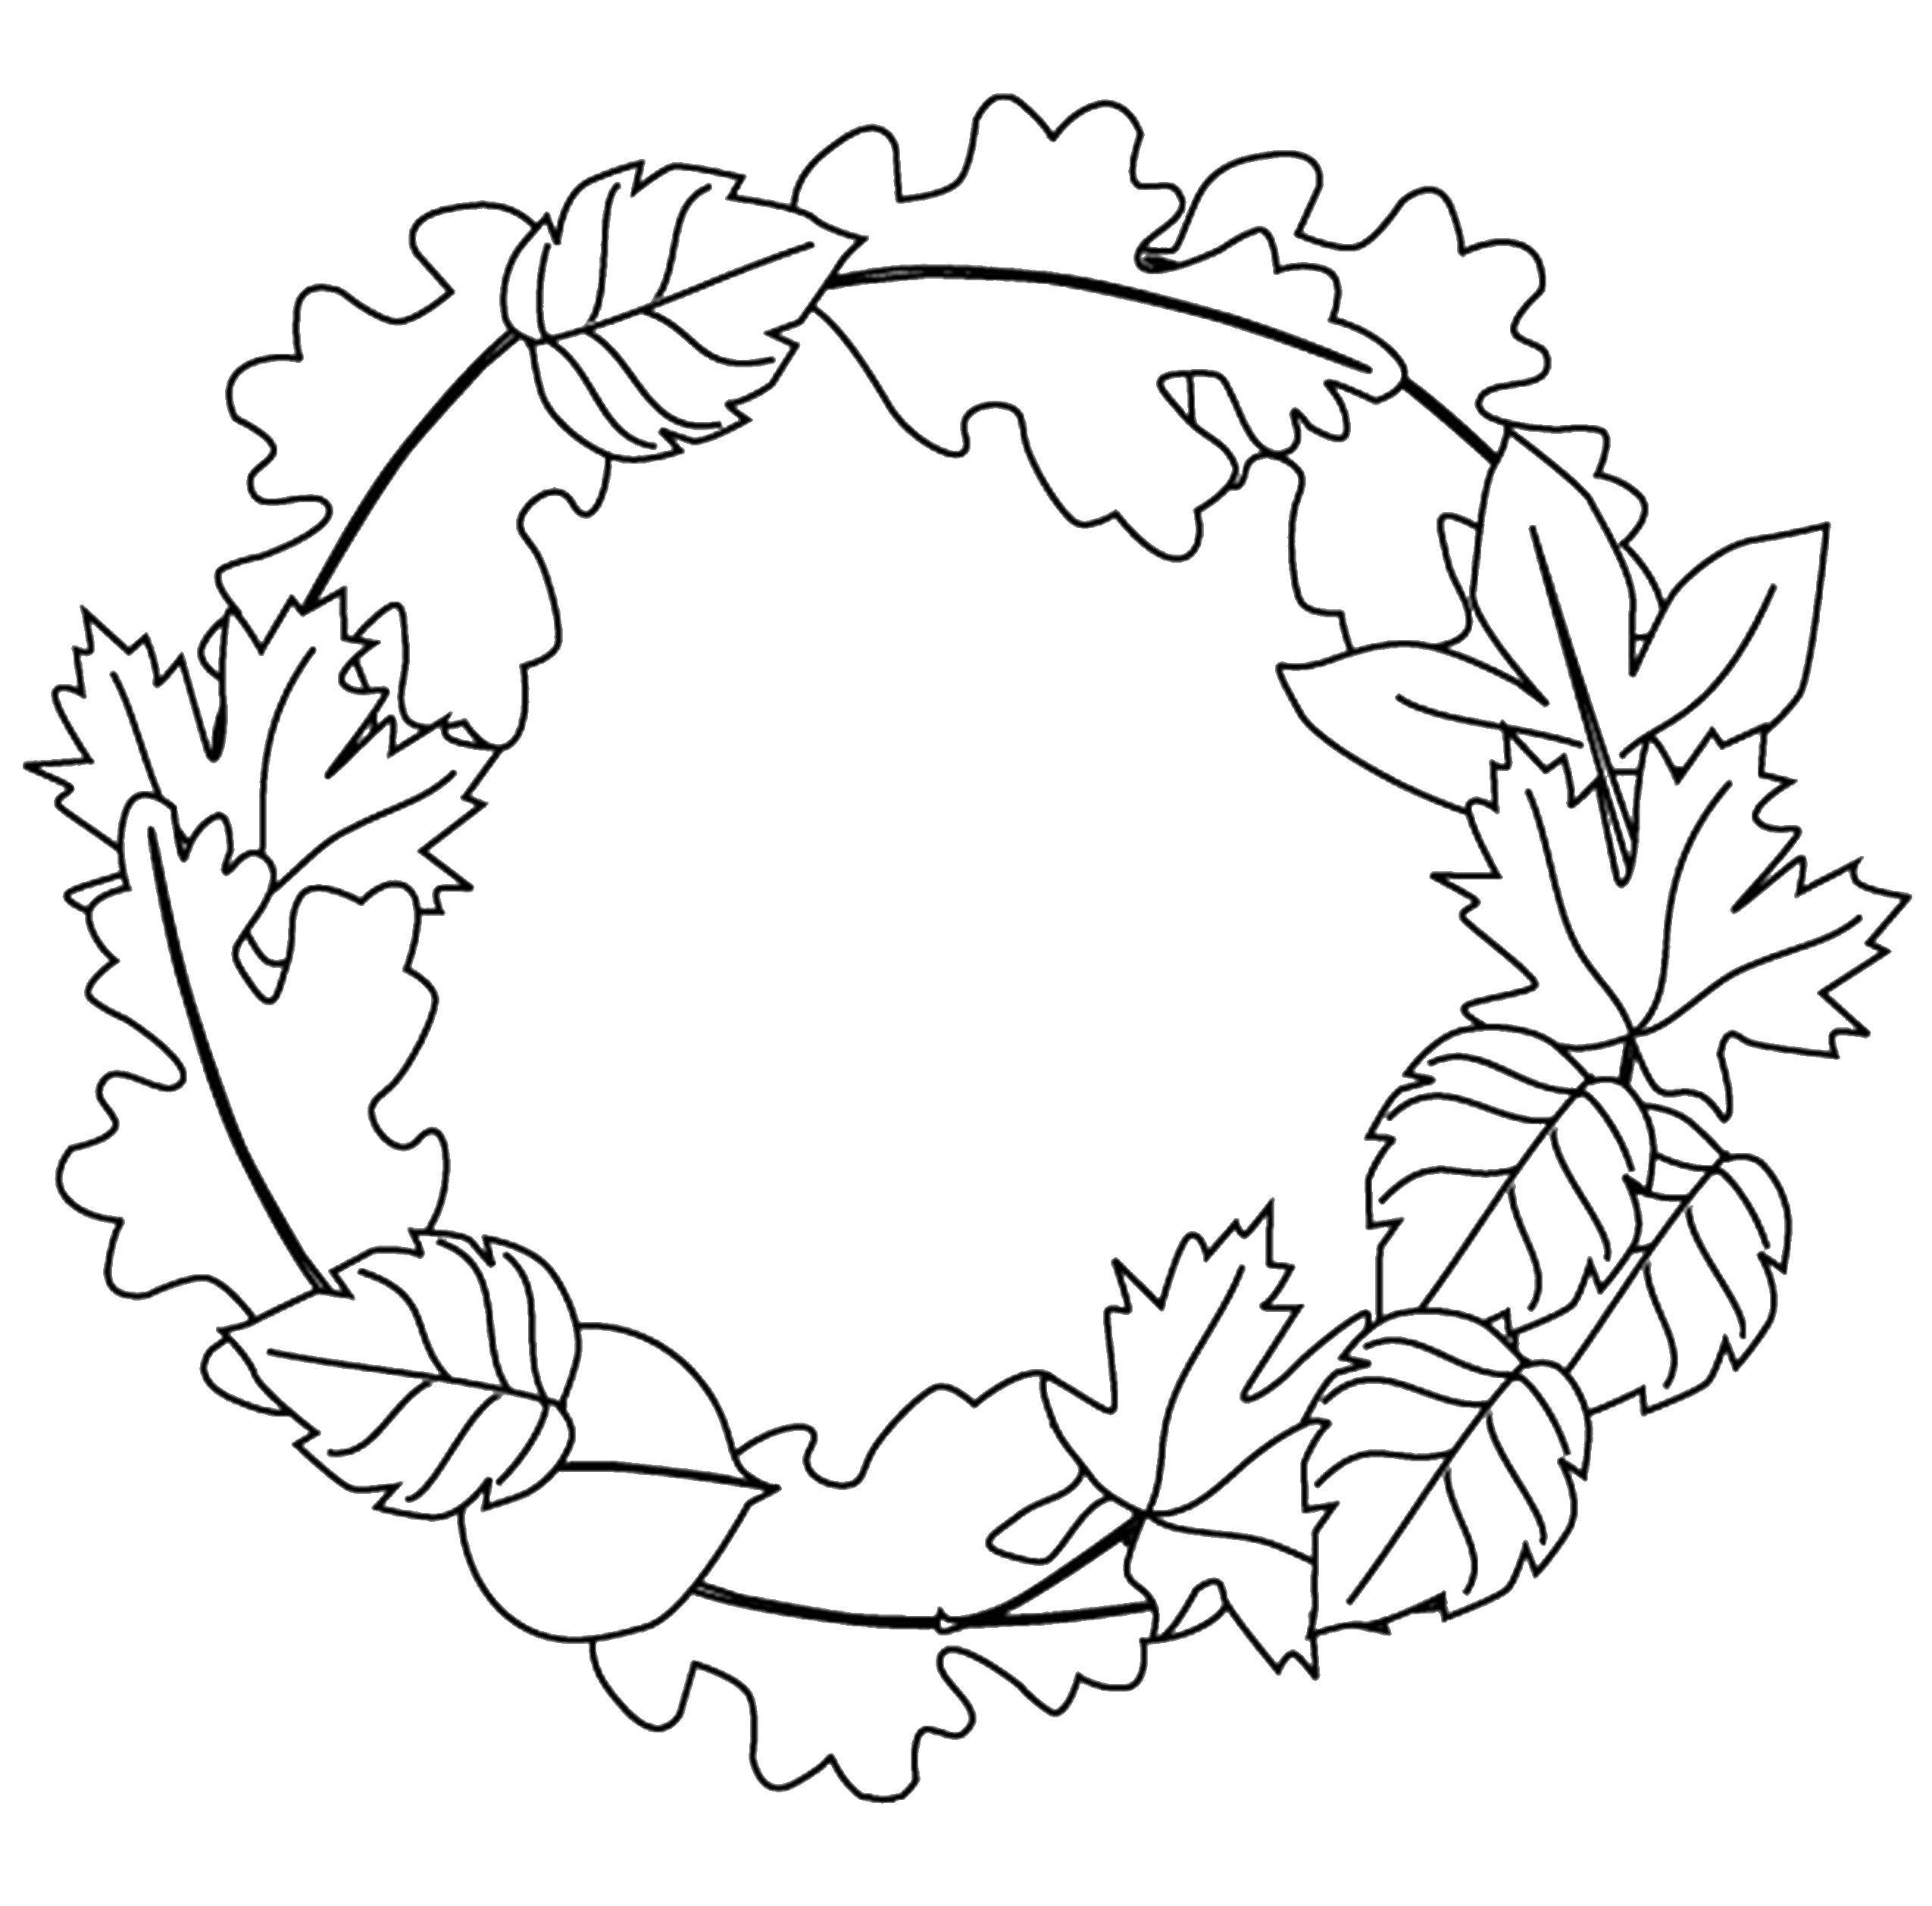 Coloring A wreath of autumn leaves. Category Autumn. Tags:  wreath, fall, leaves.